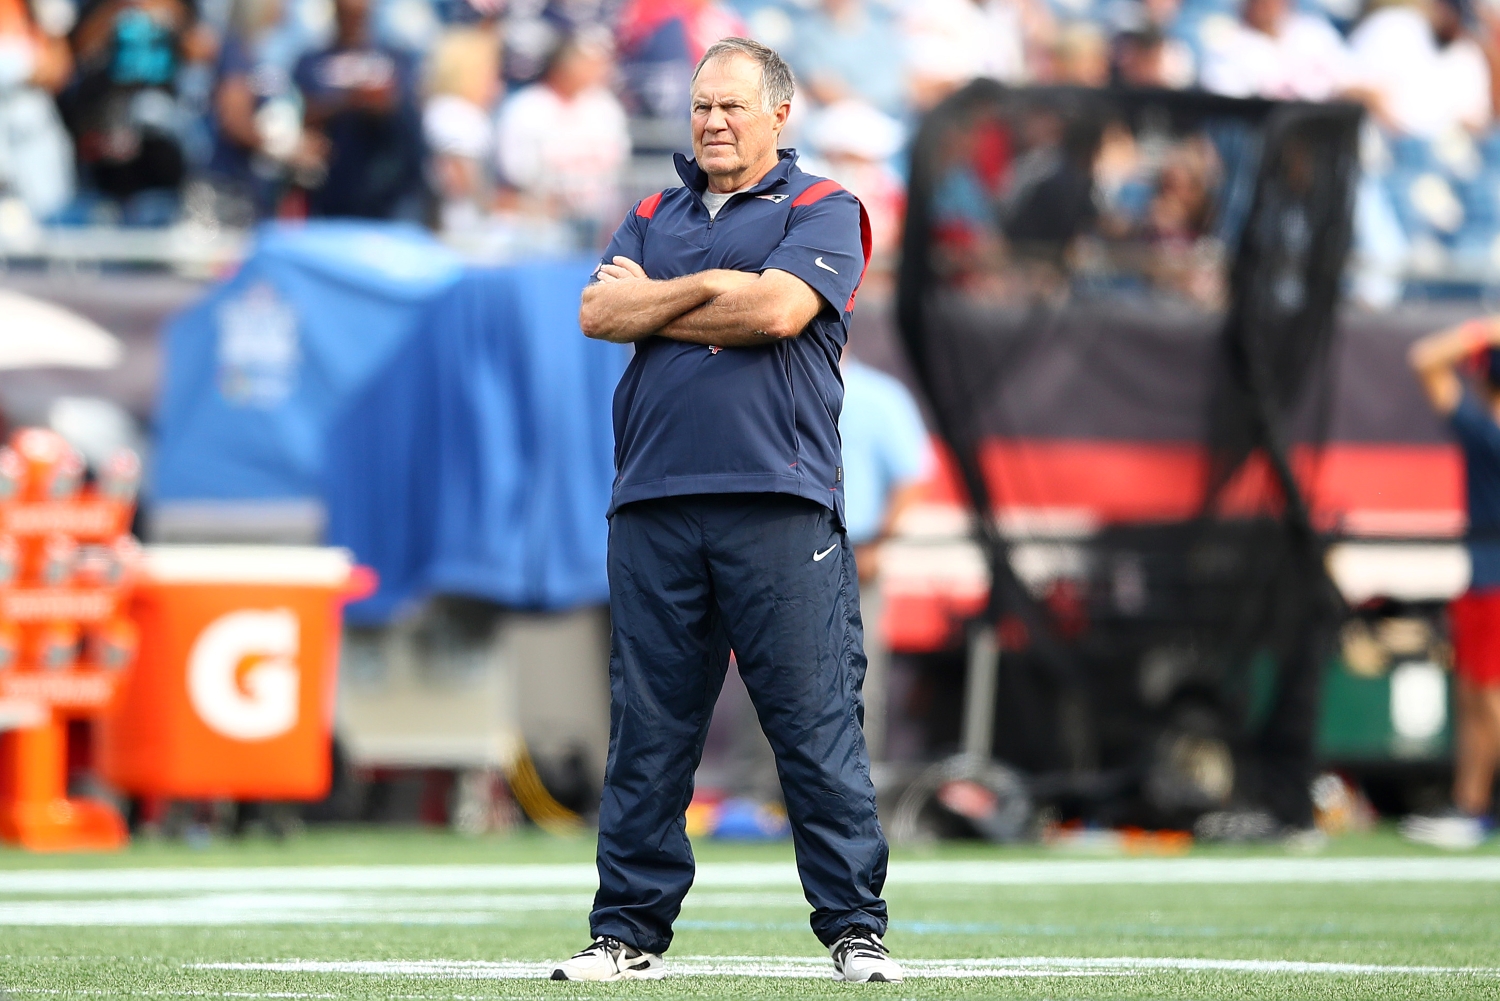 New England Patriots head coach Bill Belichick watches his team warm up before a game against the Miami Dolphins.